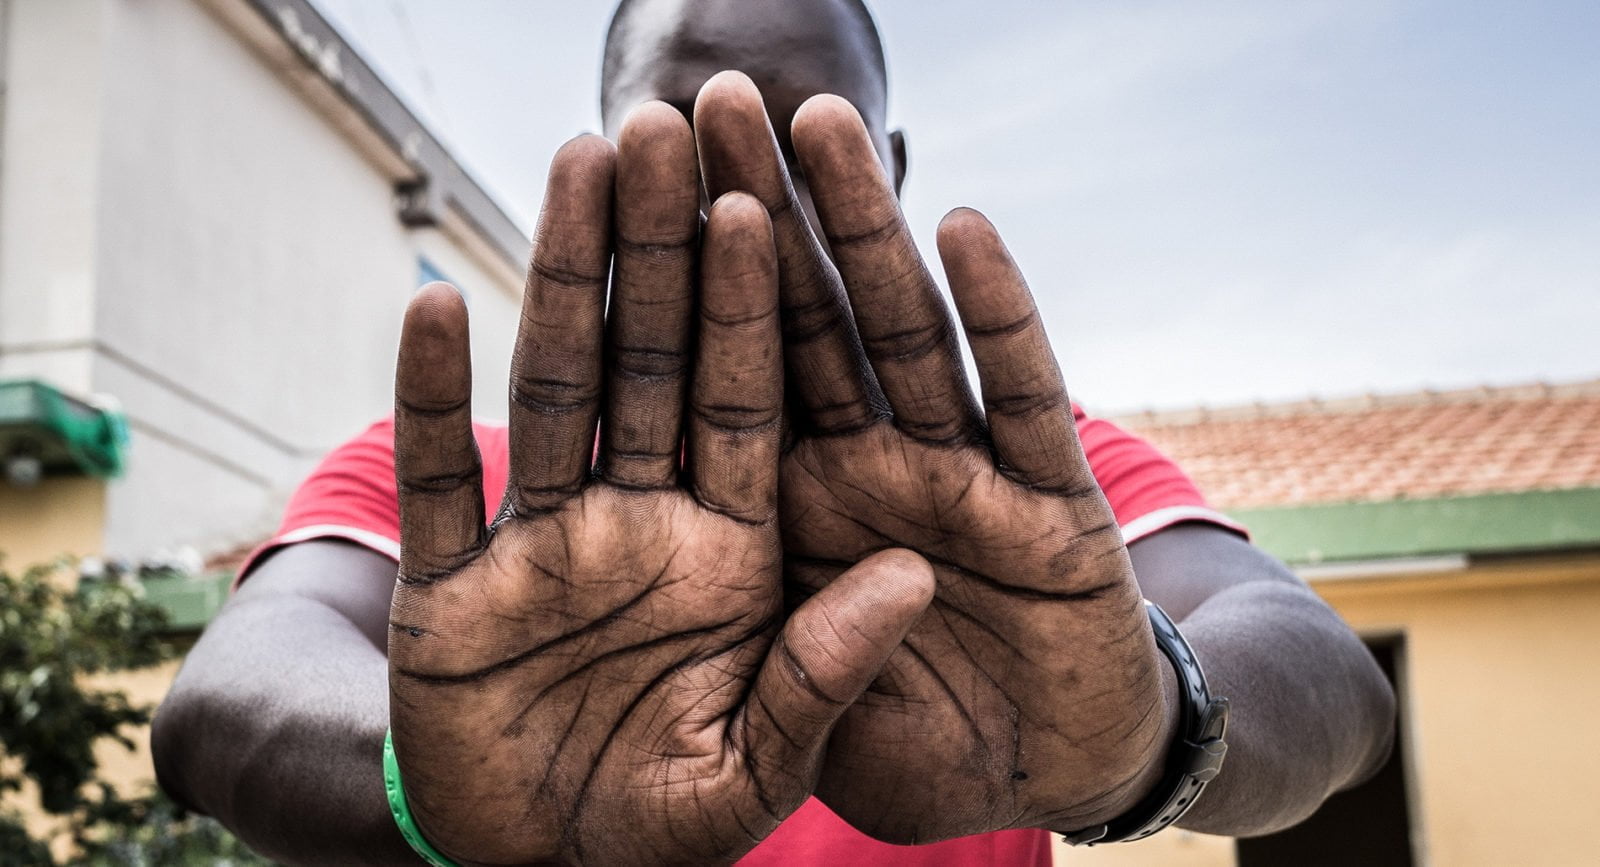 A young man from Gambia holds his hands in front of the camera, covering his face